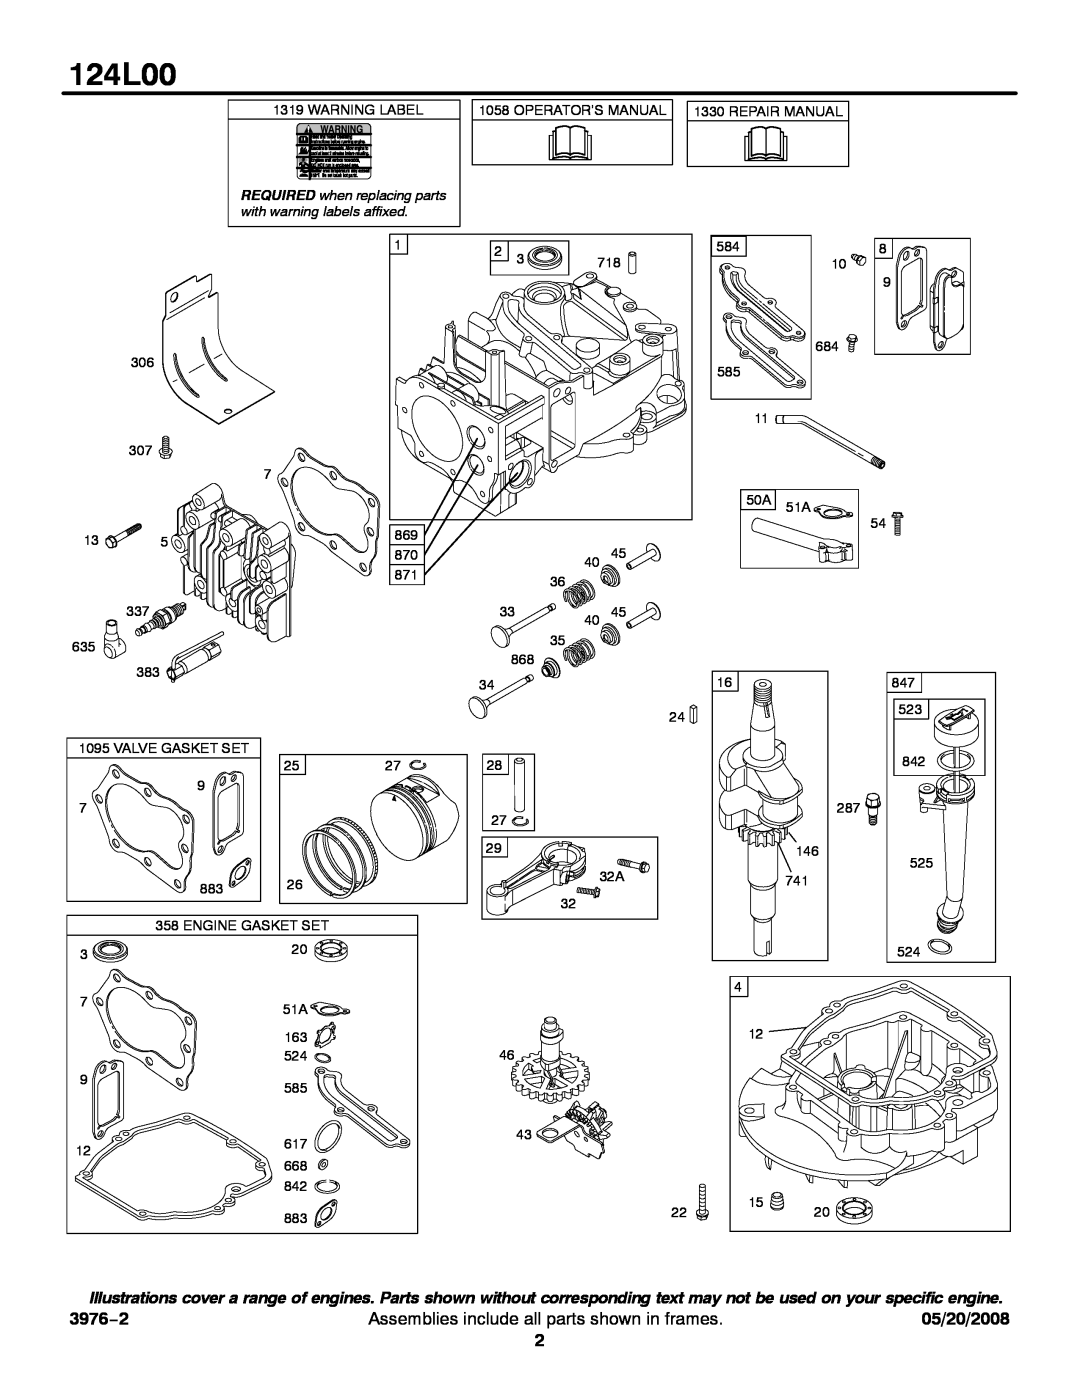 Briggs & Stratton 124L00 service manual 3976−2, Assemblies include all parts shown in frames, 05/20/2008 